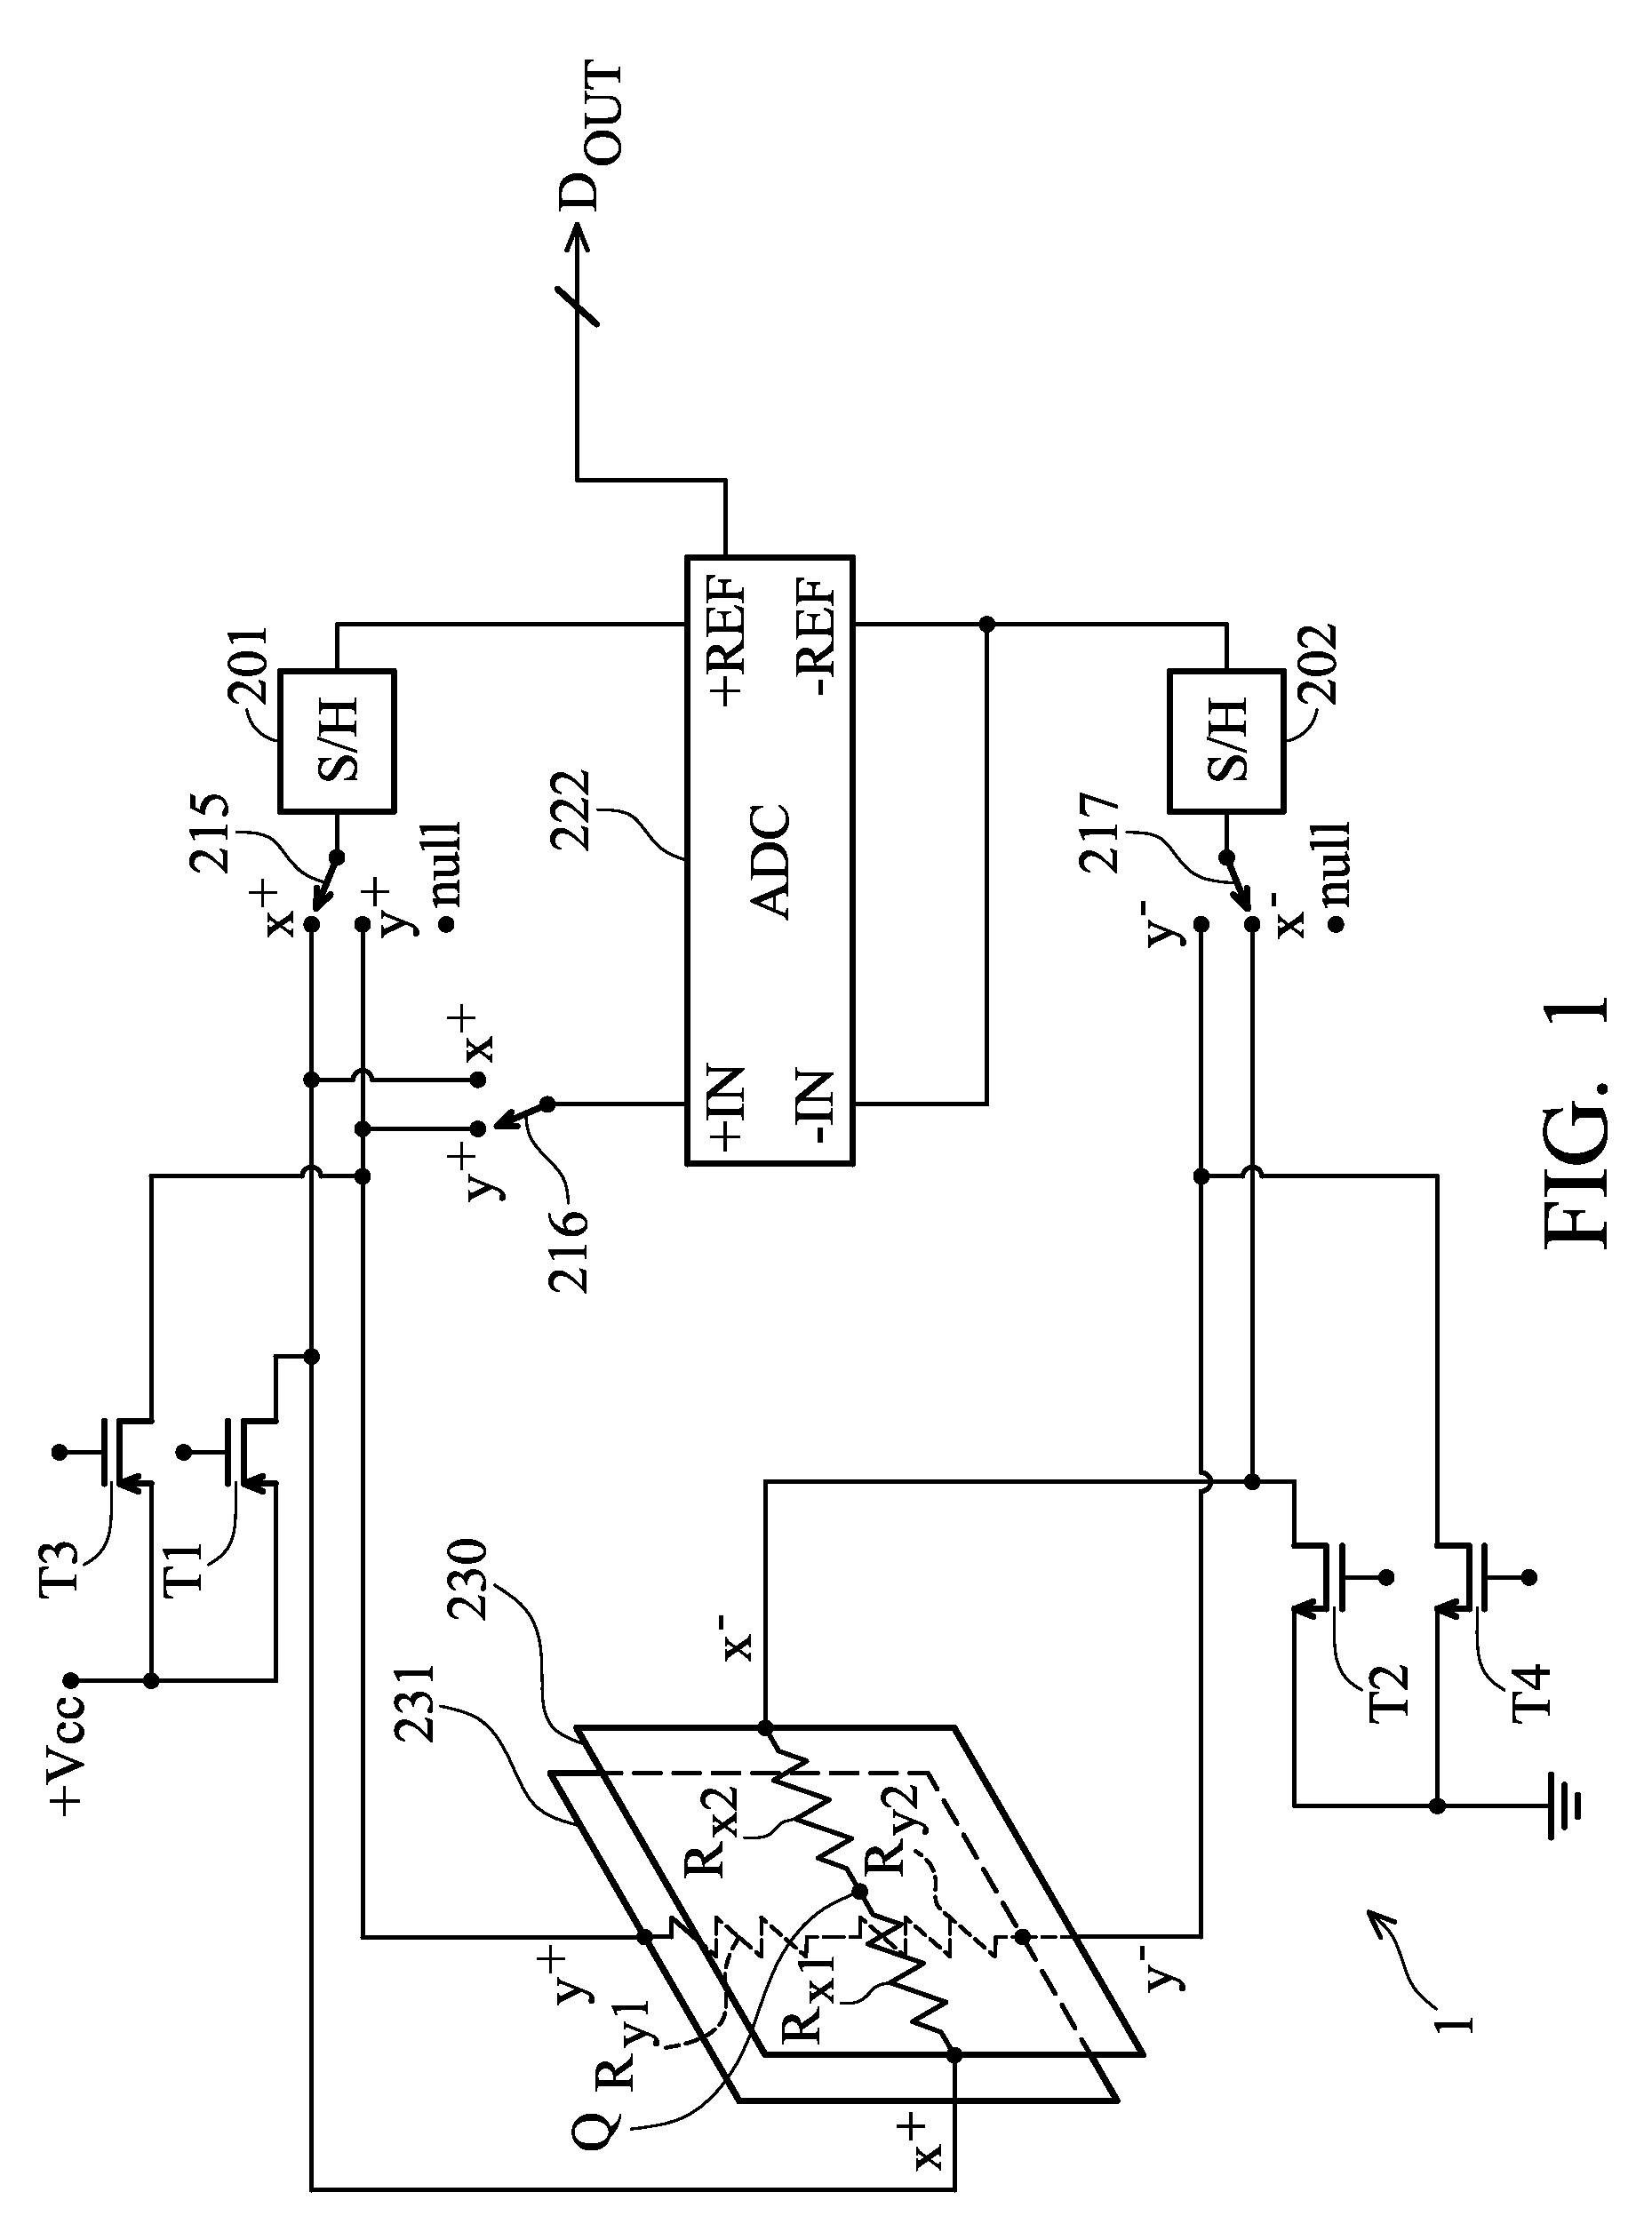 Touch screen measurement circuit and method